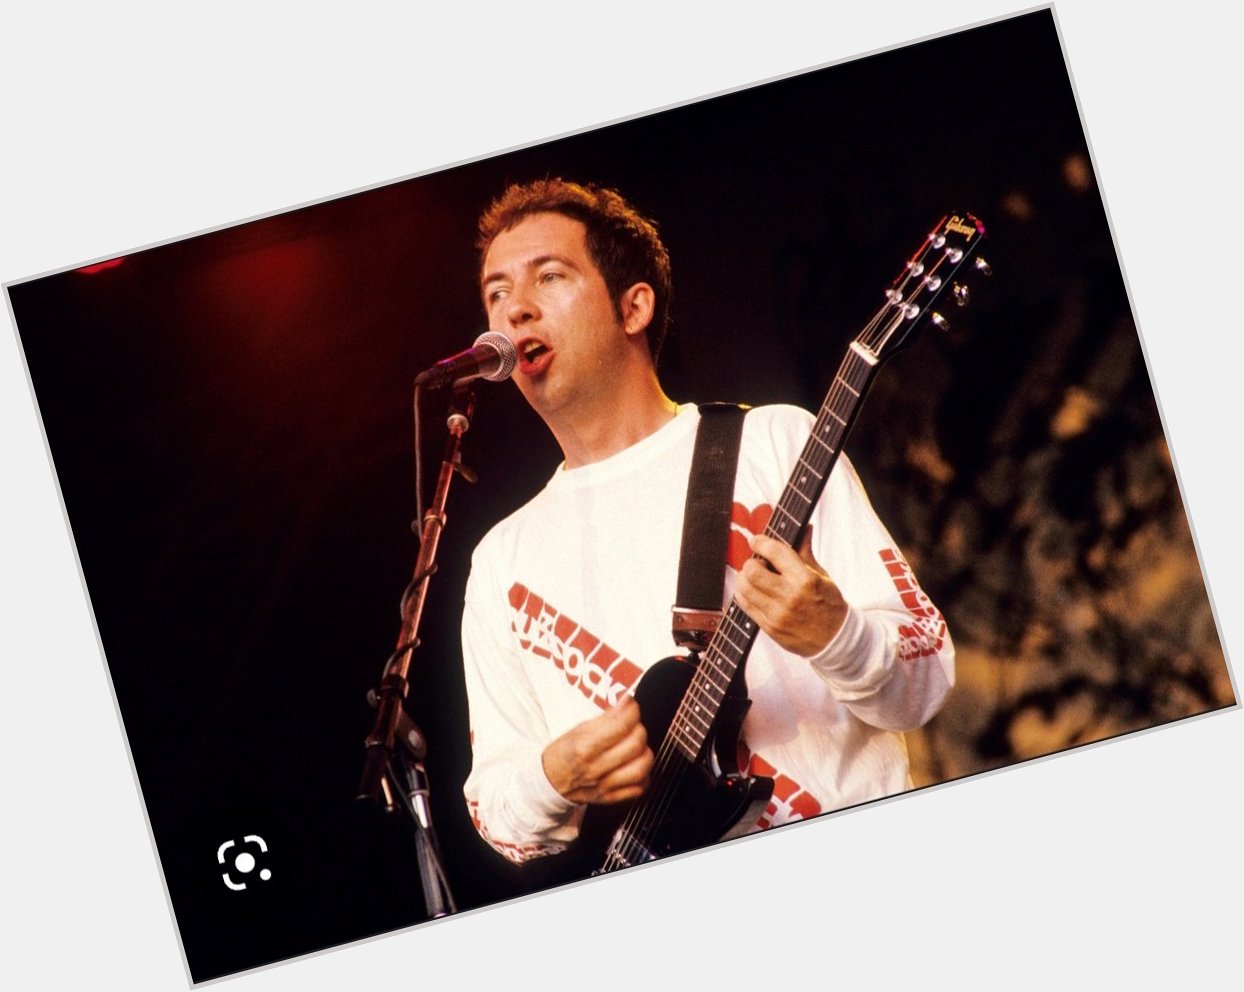 A happy heavenly birthday to the legend that is Pete Shelley   